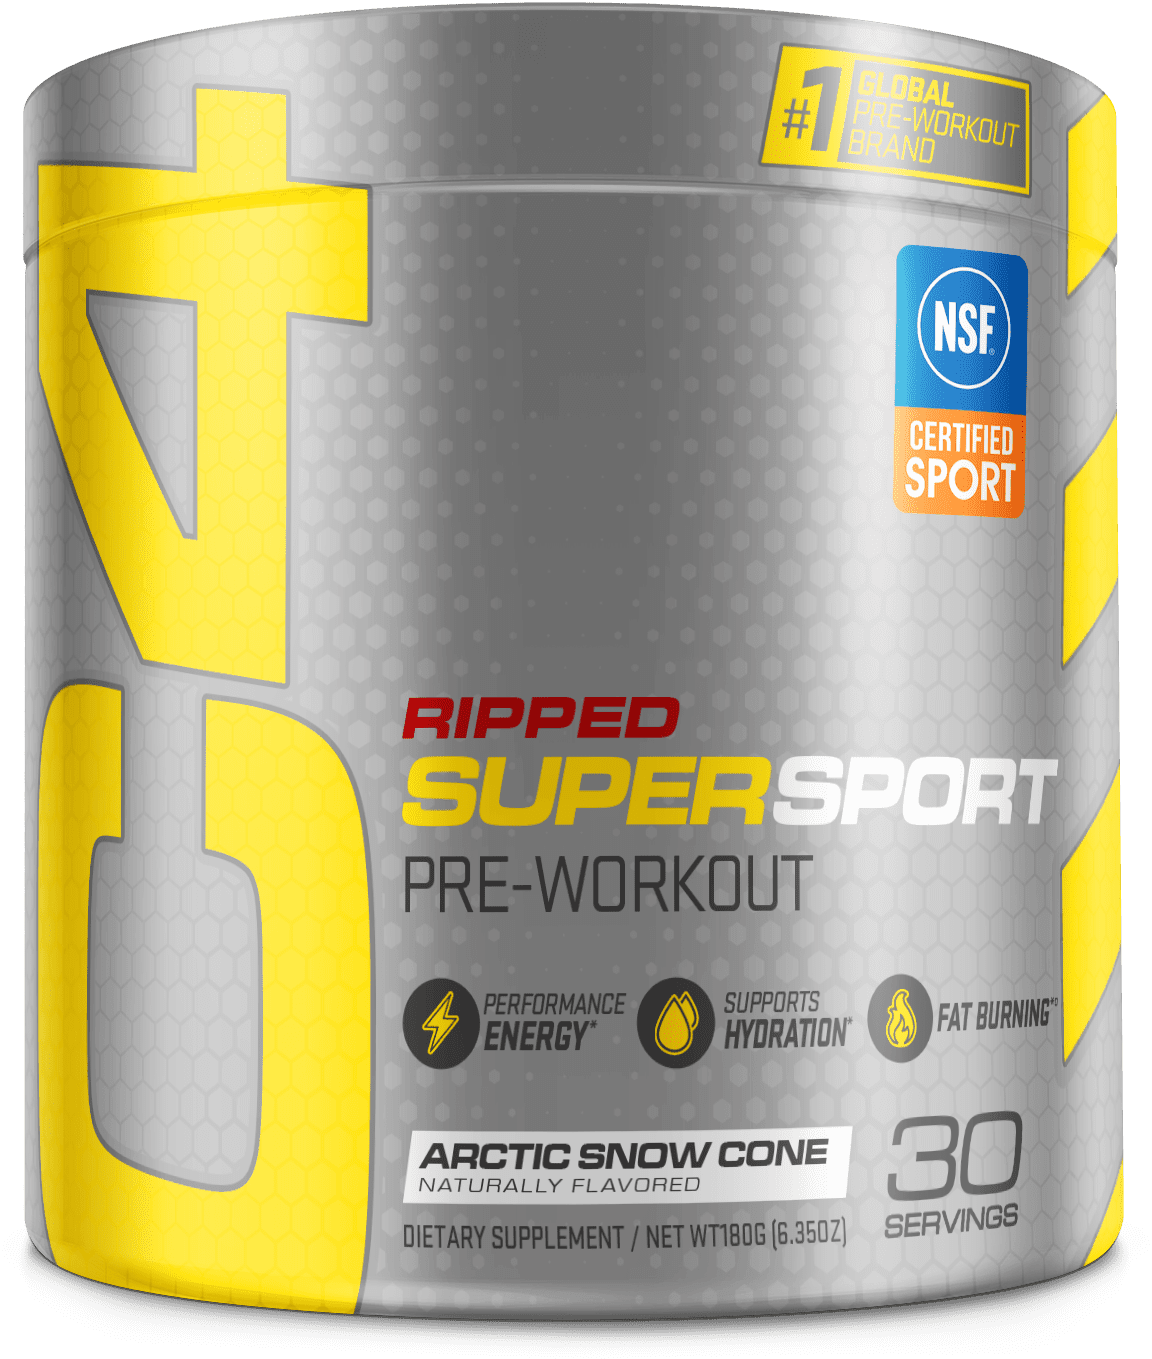 Cellucor C4 Super Sport Ripped Pre-Workout Powder, Arctic Snow Cone, Fat Burner, Energy, Hydration, 30 Servings